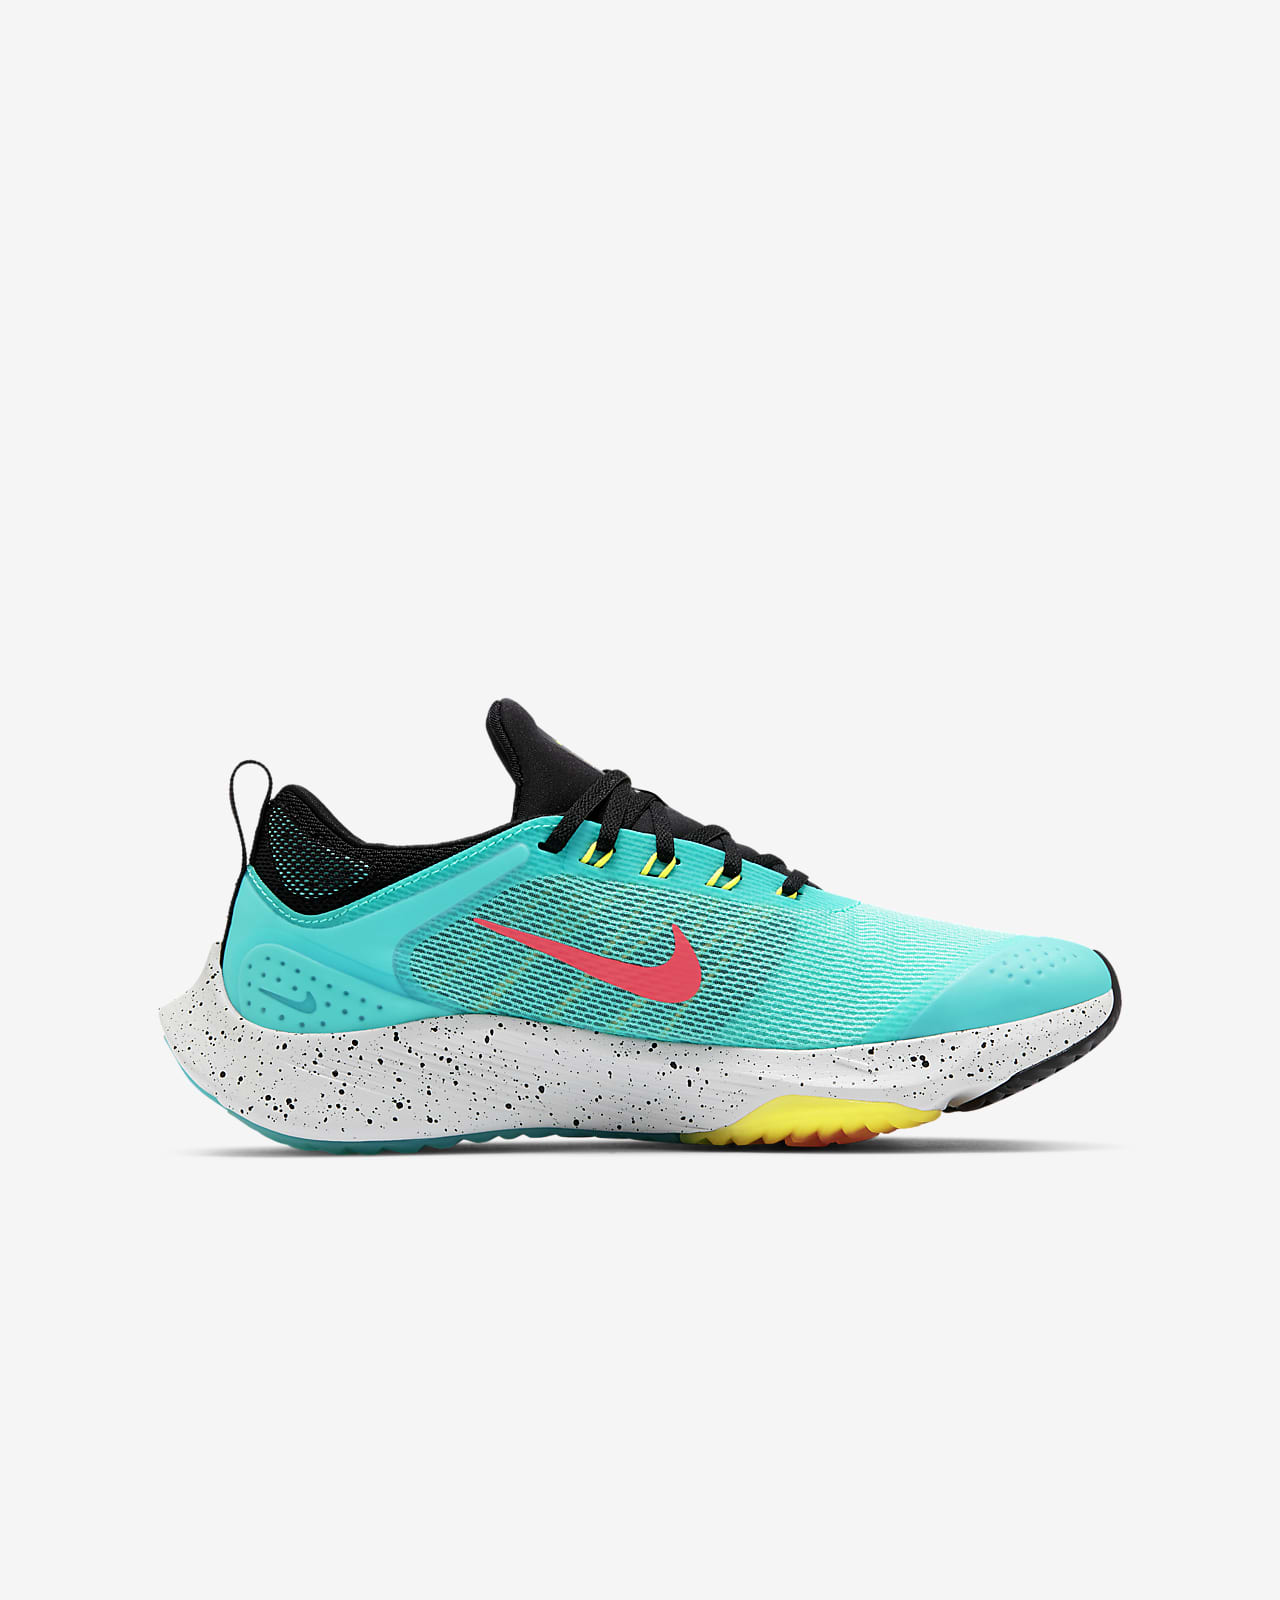 Nike Air Zoom Speed Younger/Older Kids 